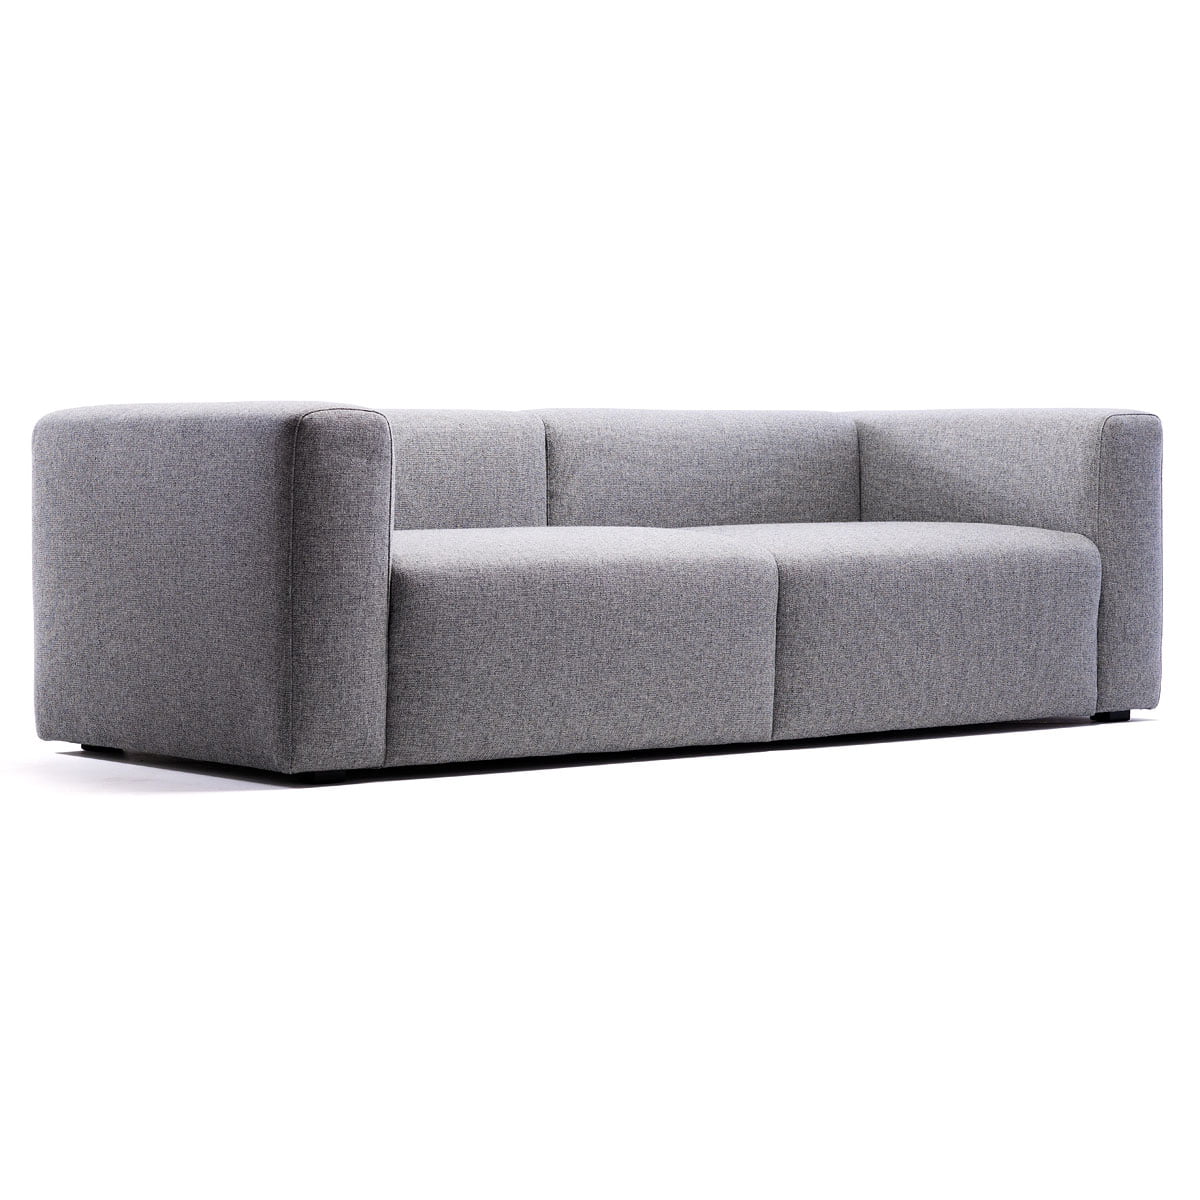 Hay Mags Sofa 2 5 Places Connox